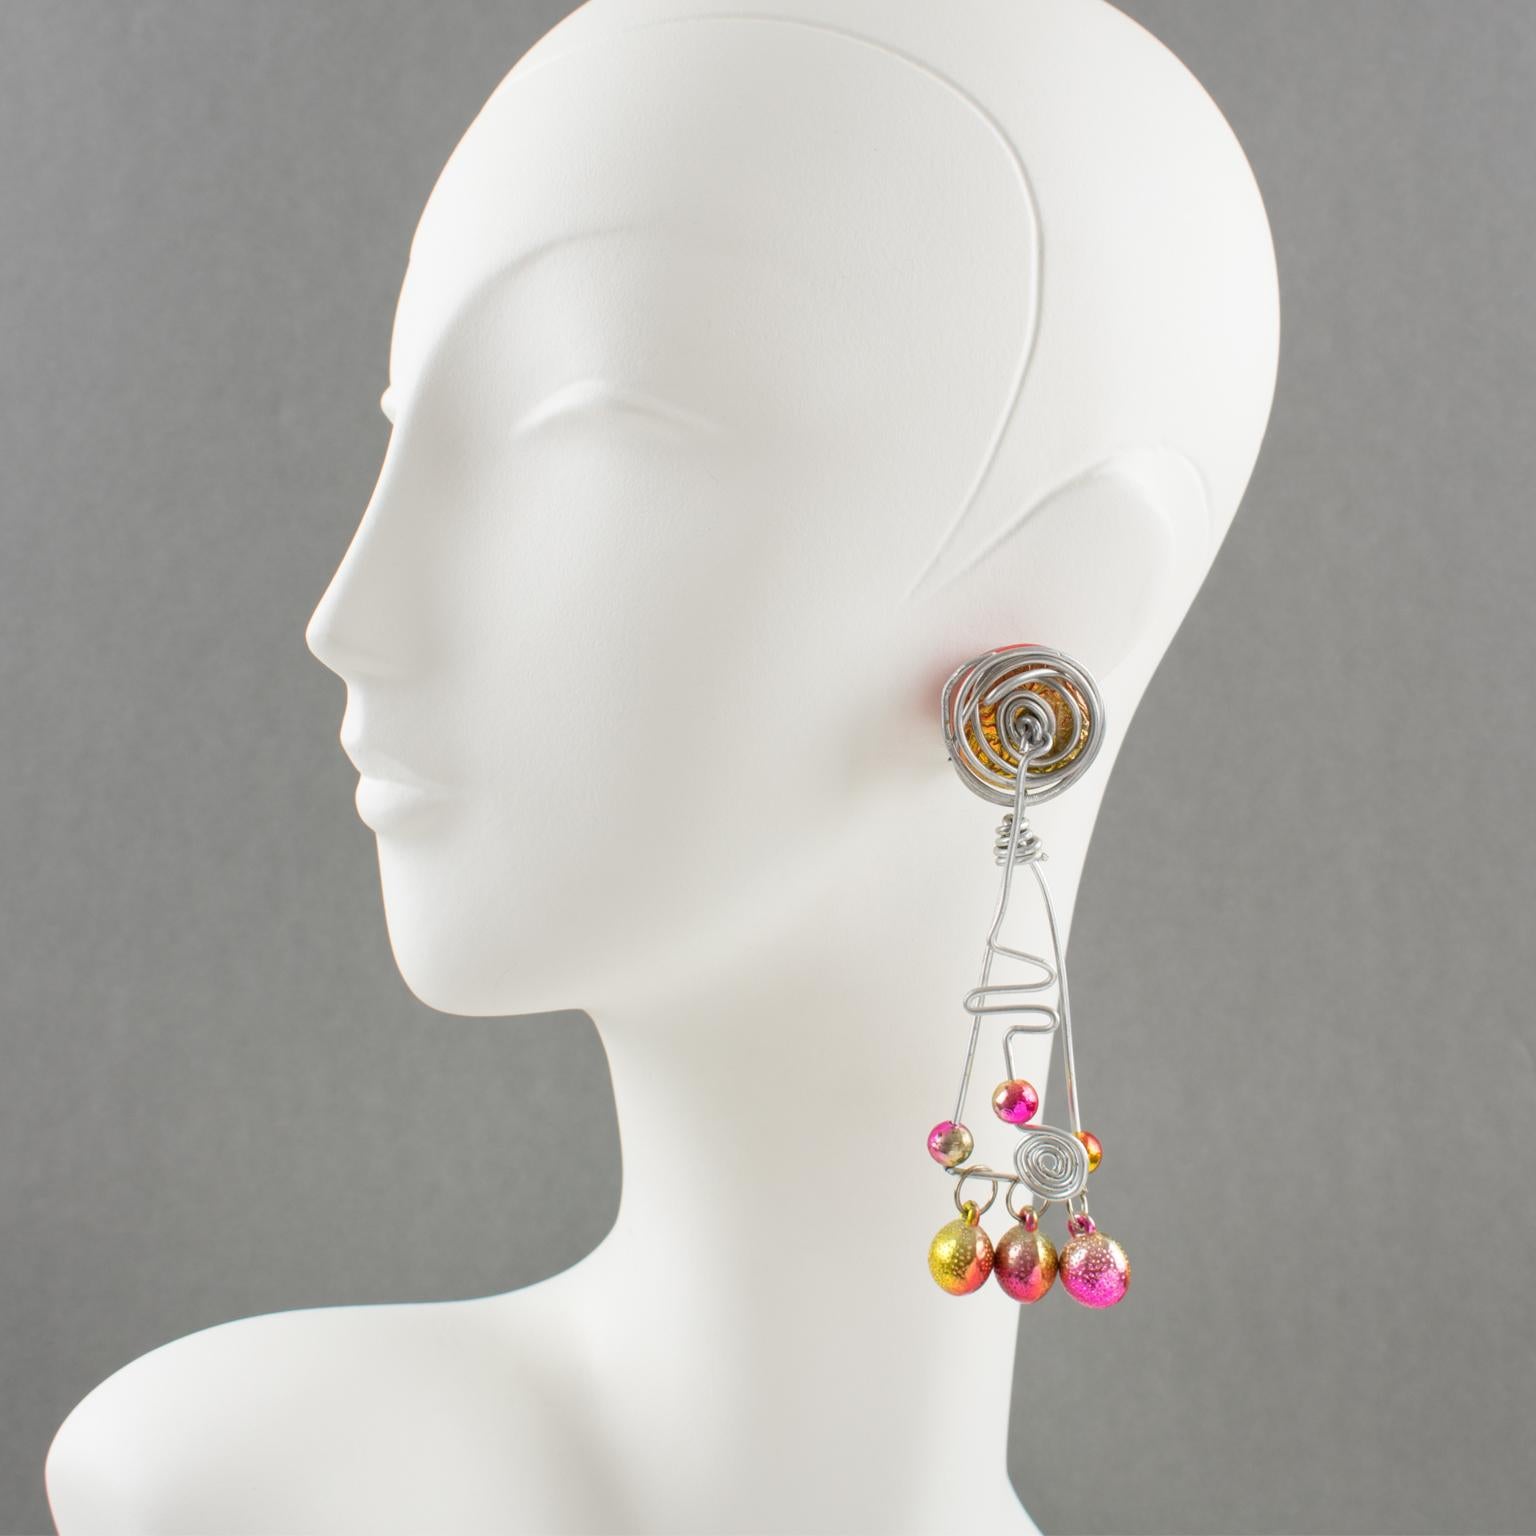 Those impressive 1990s Space Age oversized aluminum dangling clip-on earrings feature a stunning hand-made futuristic design with a dangle articulated spiral coil and geometric elements along with assorted size beads. The iridescent hot pink and